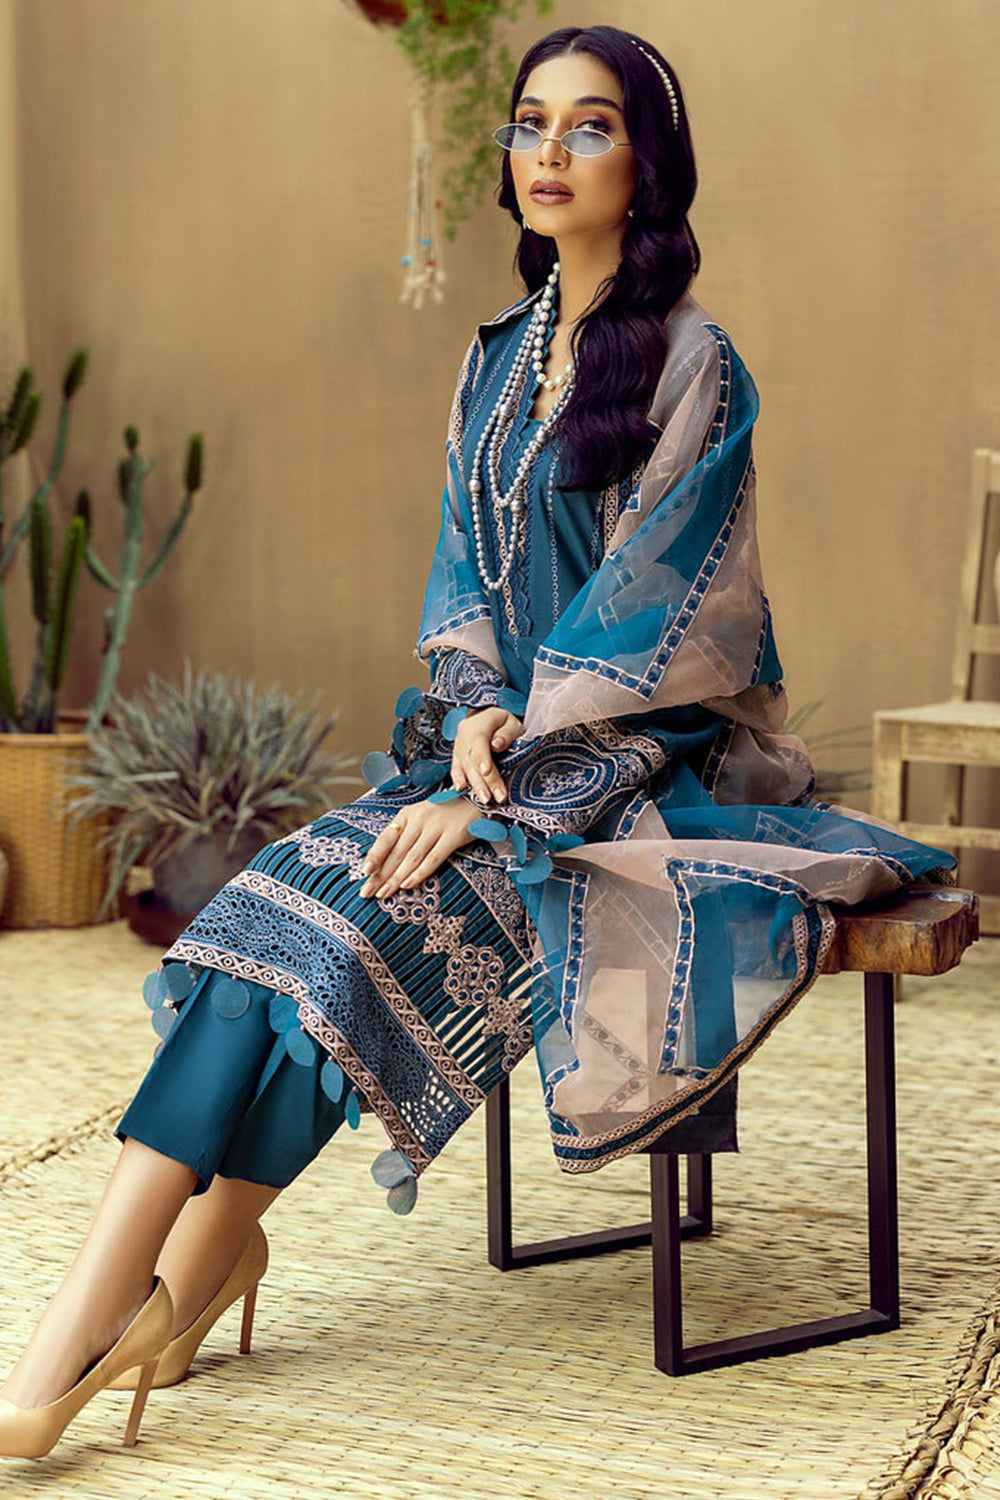 Peacock Blue Embroidered Lawn Suit